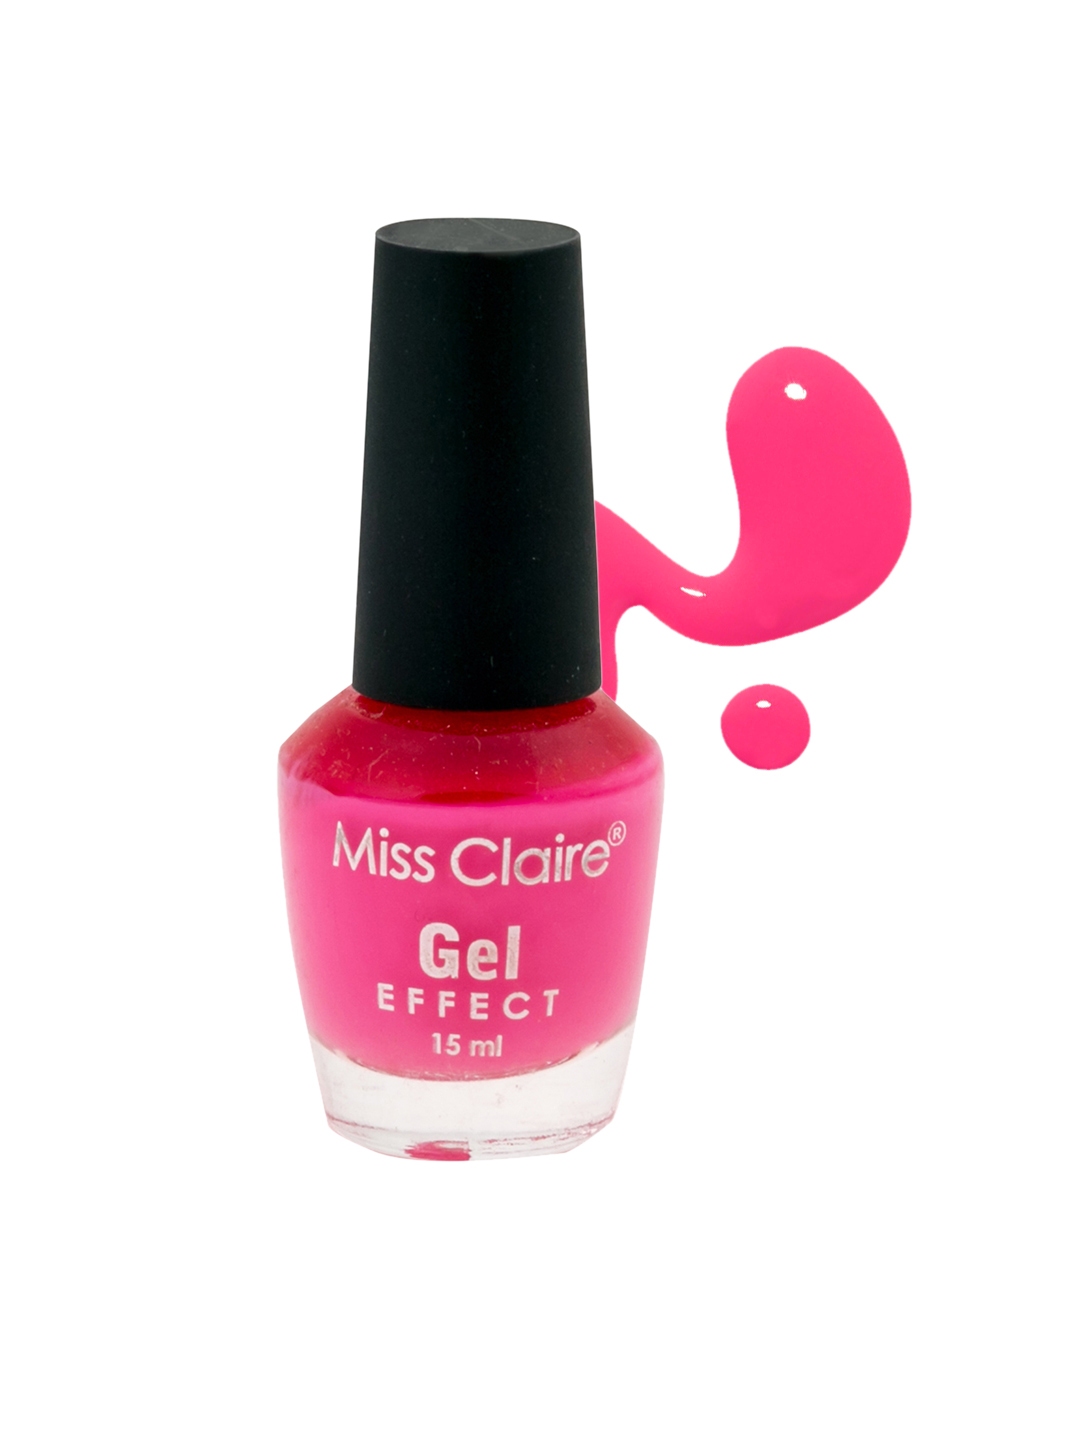 Miss Claire Quick Dry Nail Polish Shade 19 & 12